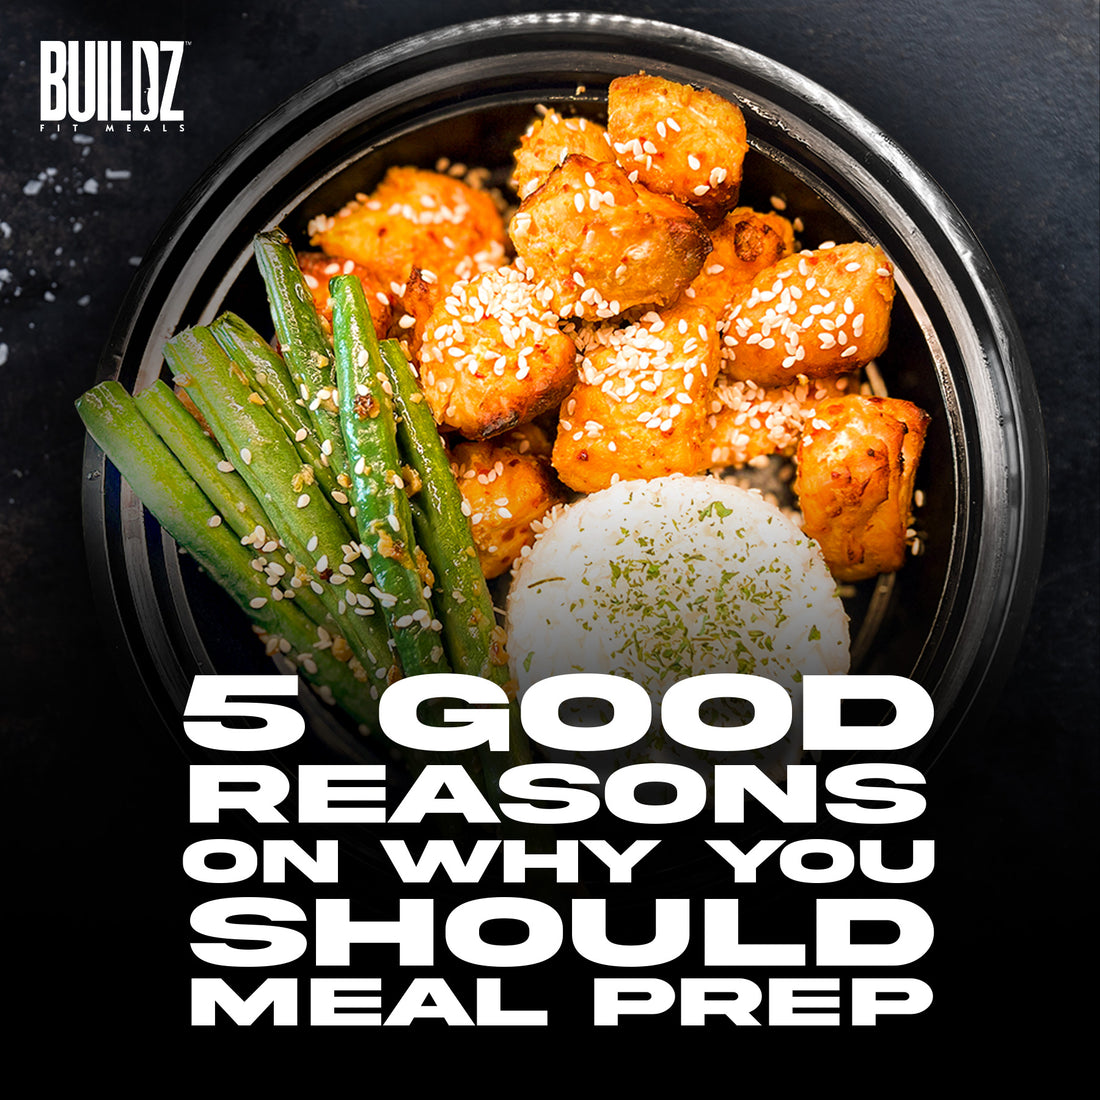 5 Reasons on why you should meal prep